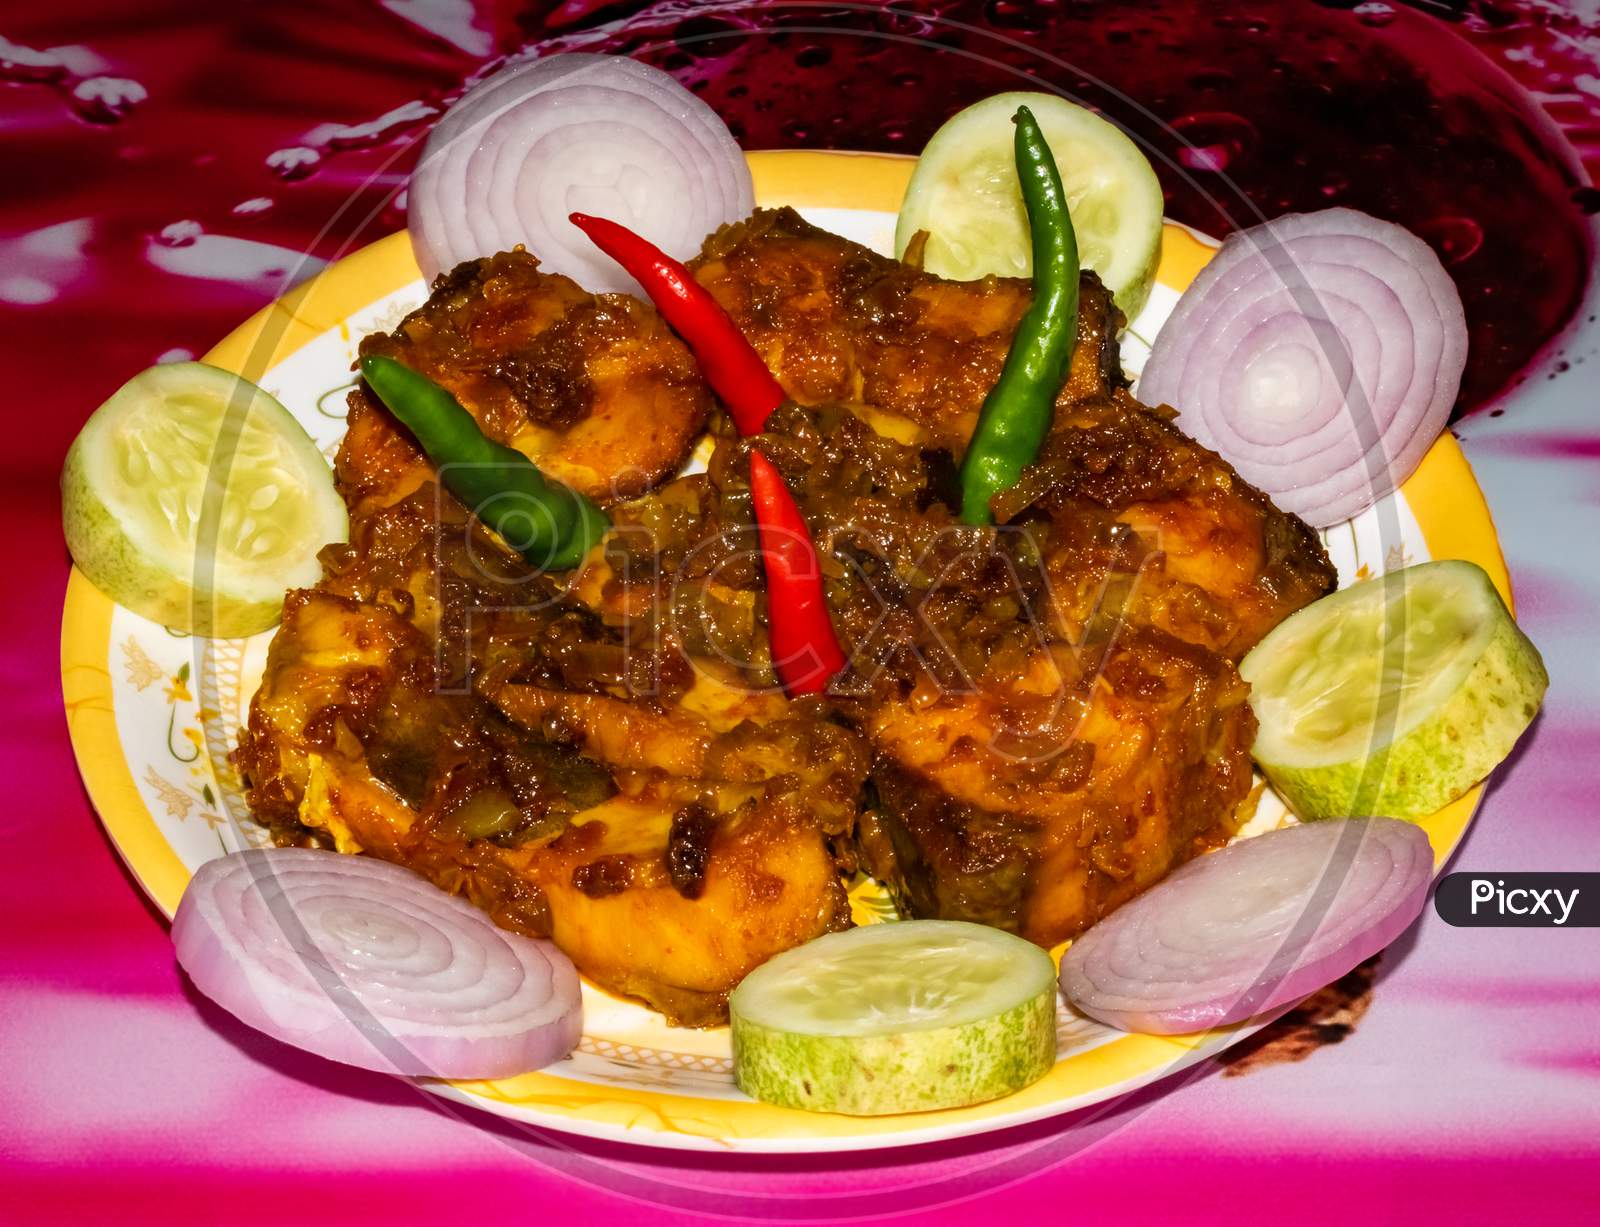 Spicy tasty Indian fish dish garnished with chili onion rings and cucumbers